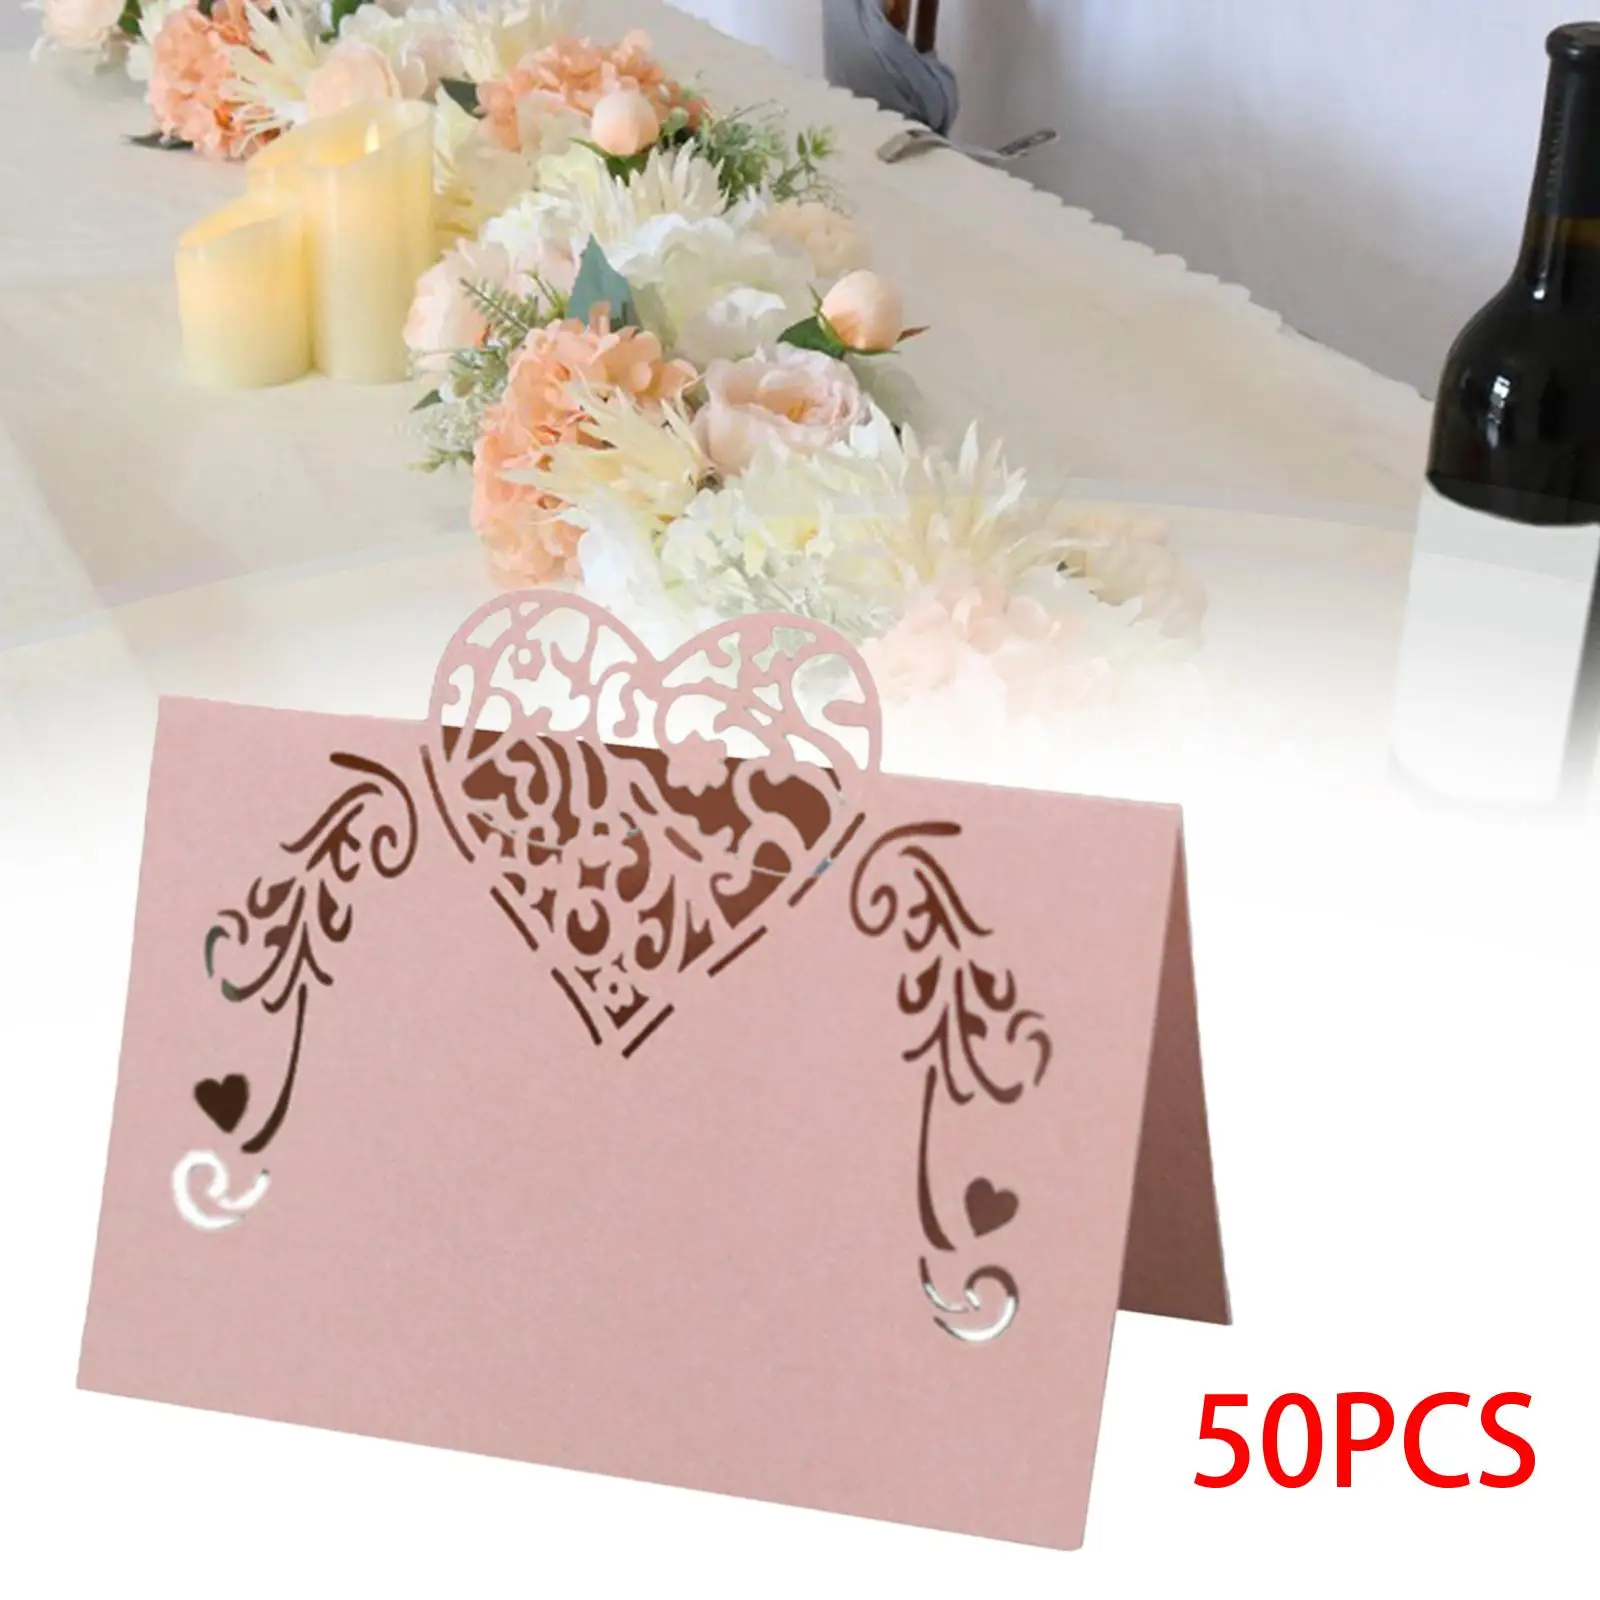 50 Pieces Paper Place Cards Table Setting Name Card Seating Place Card for Wedding Reception Engagement Anniversary party